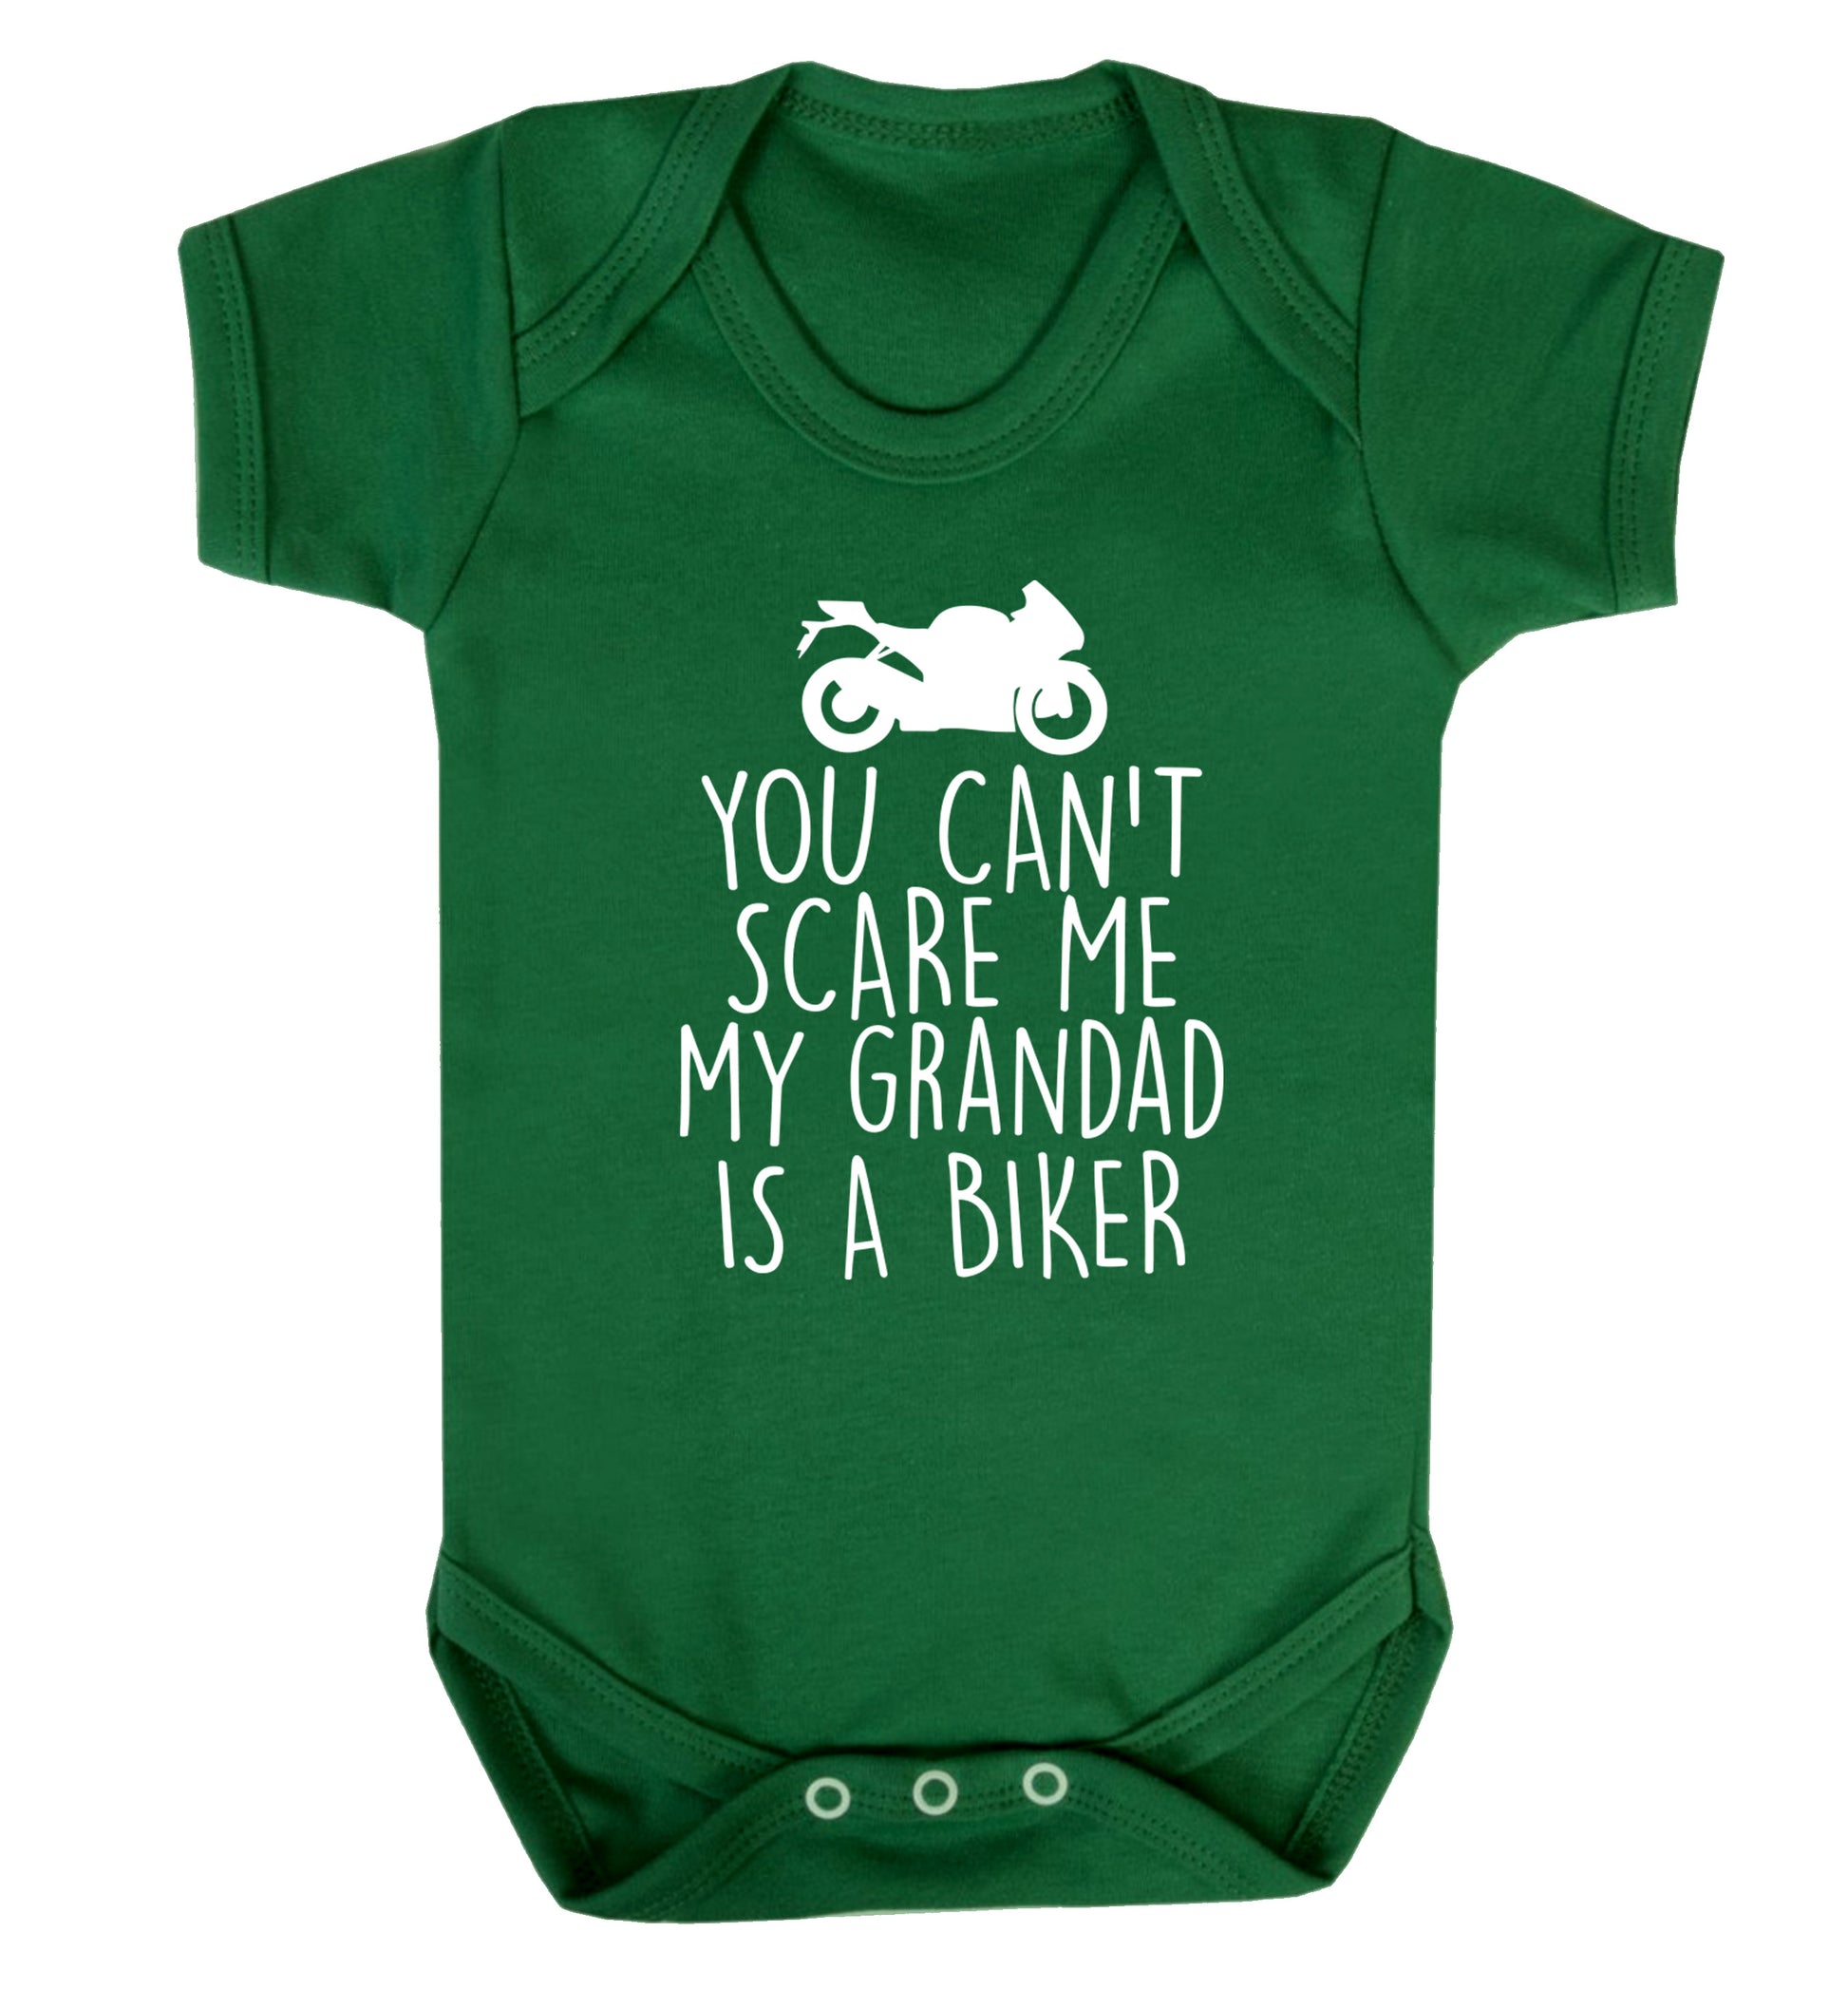 You can't scare me my grandad is a biker Baby Vest green 18-24 months